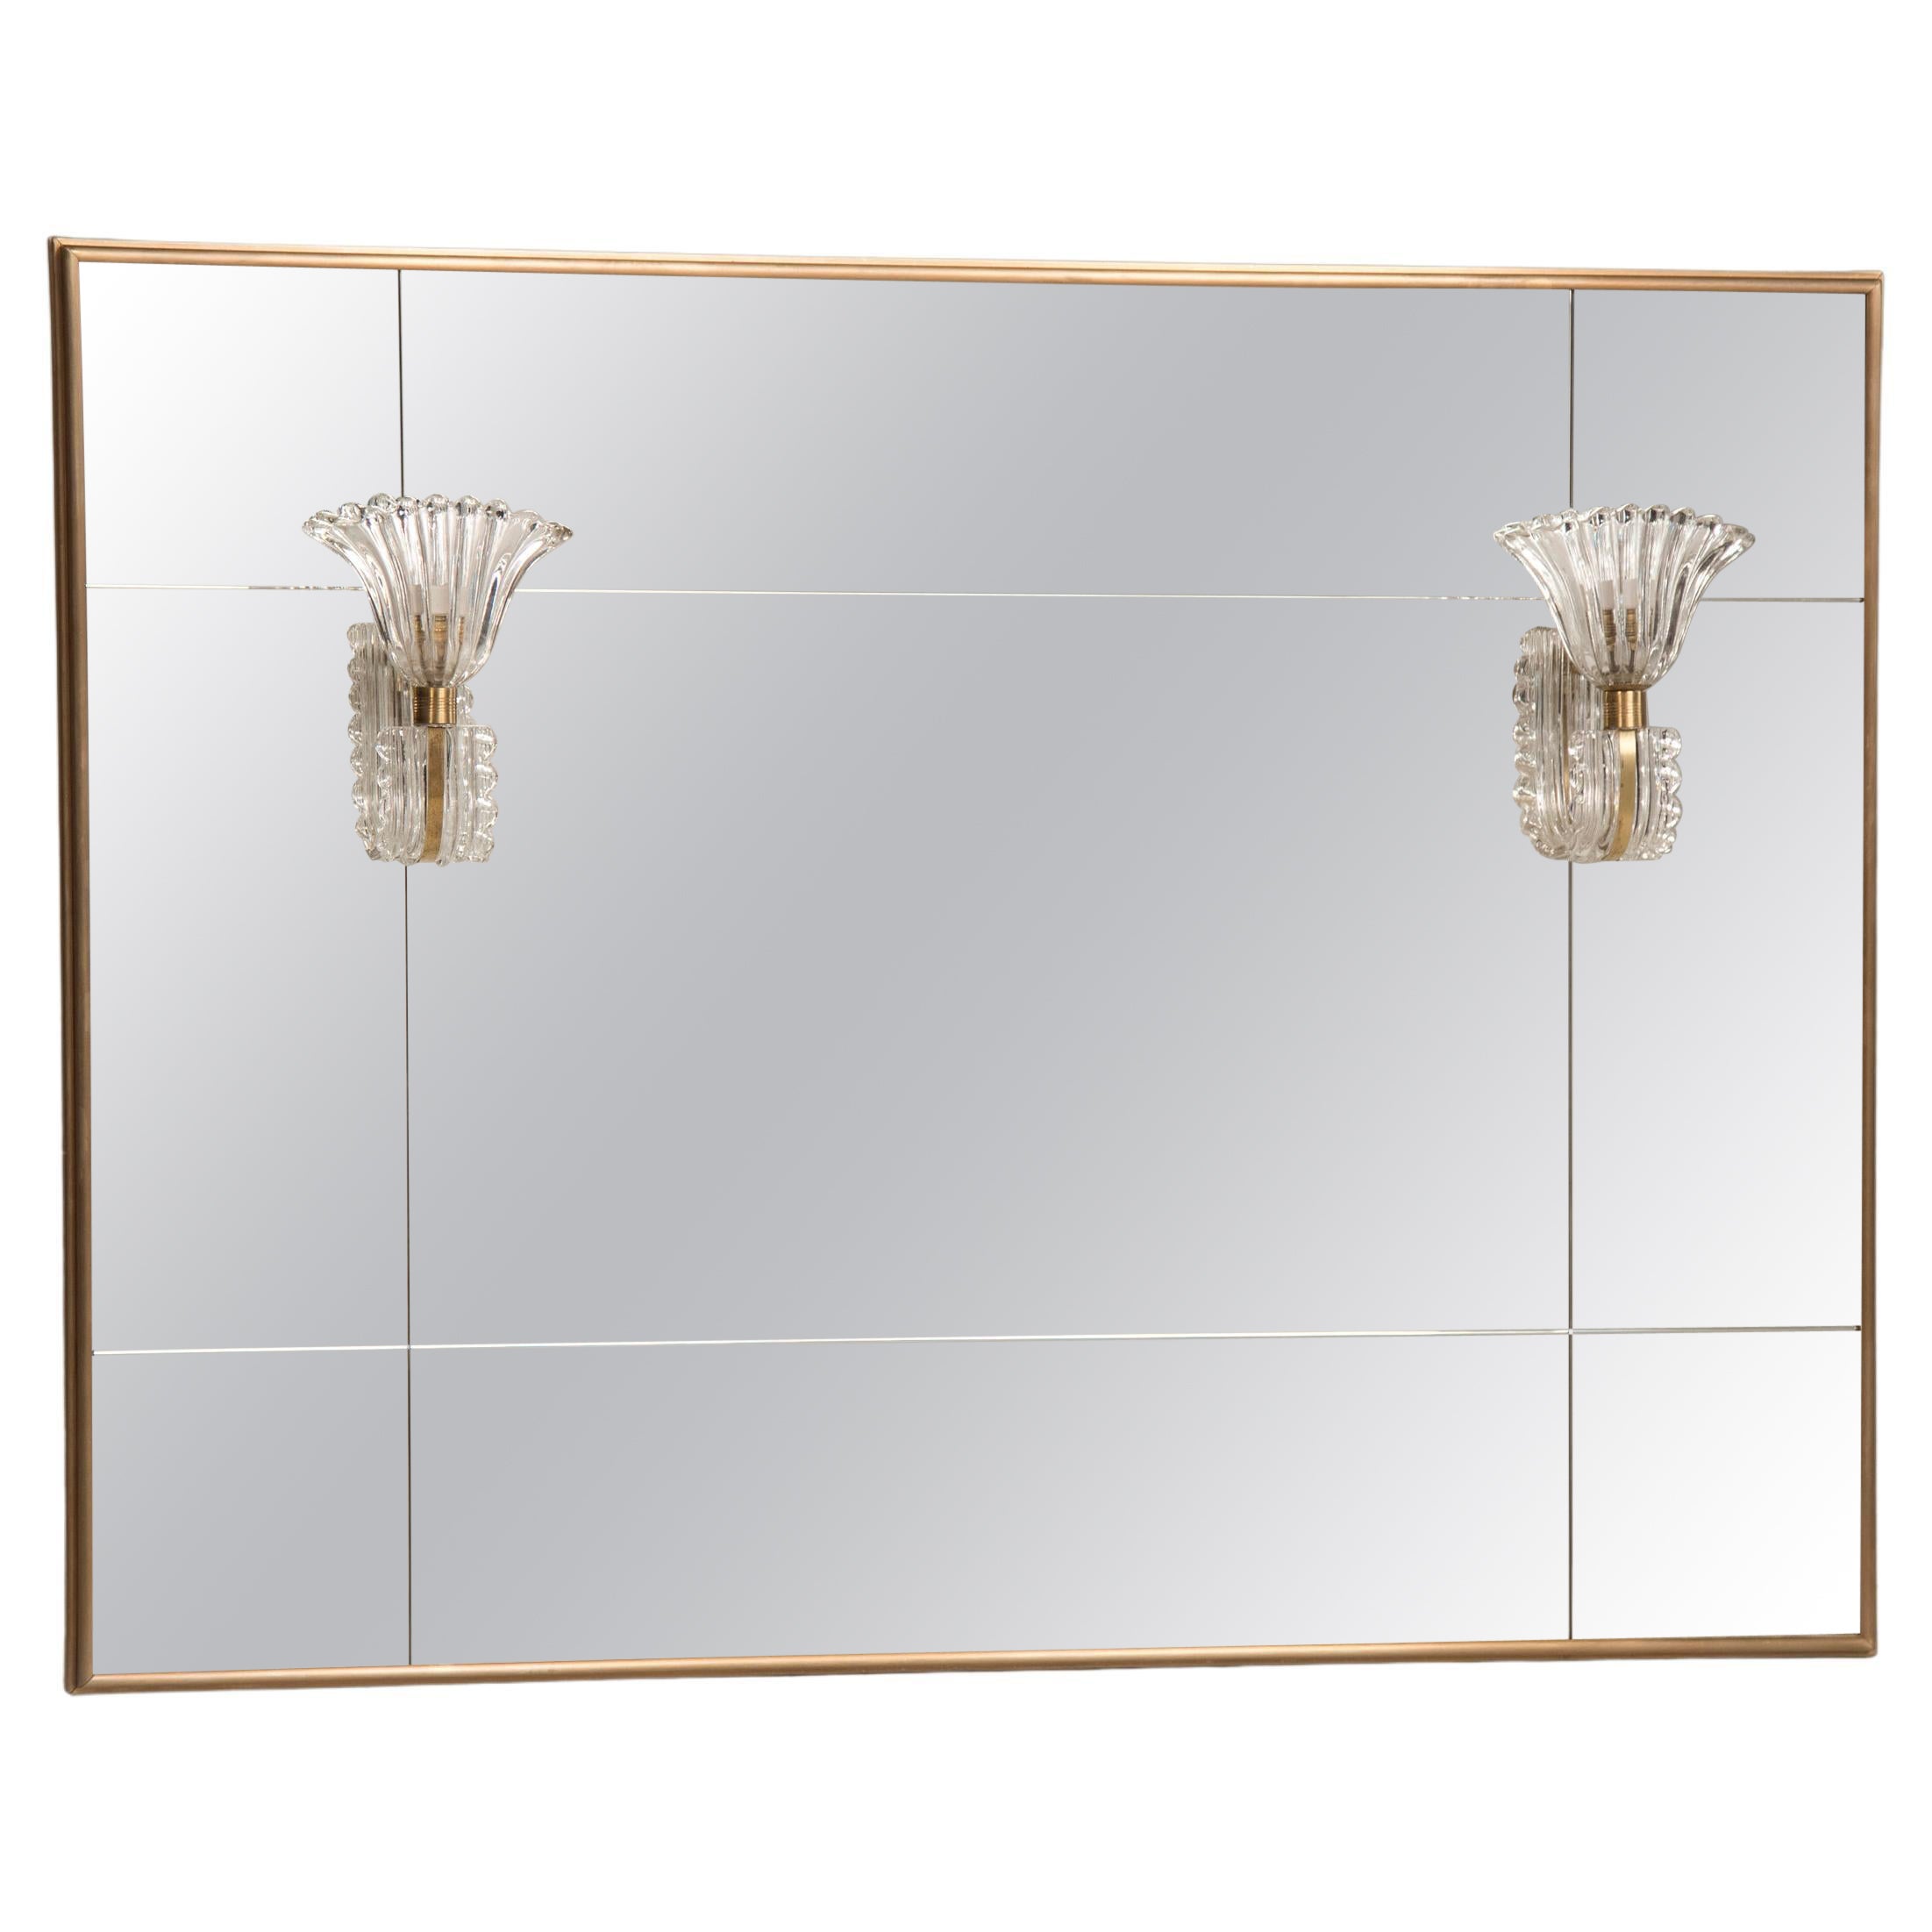 Brass Frame paneled Mirror with Studs and Glass Sconces Lights by Barovier